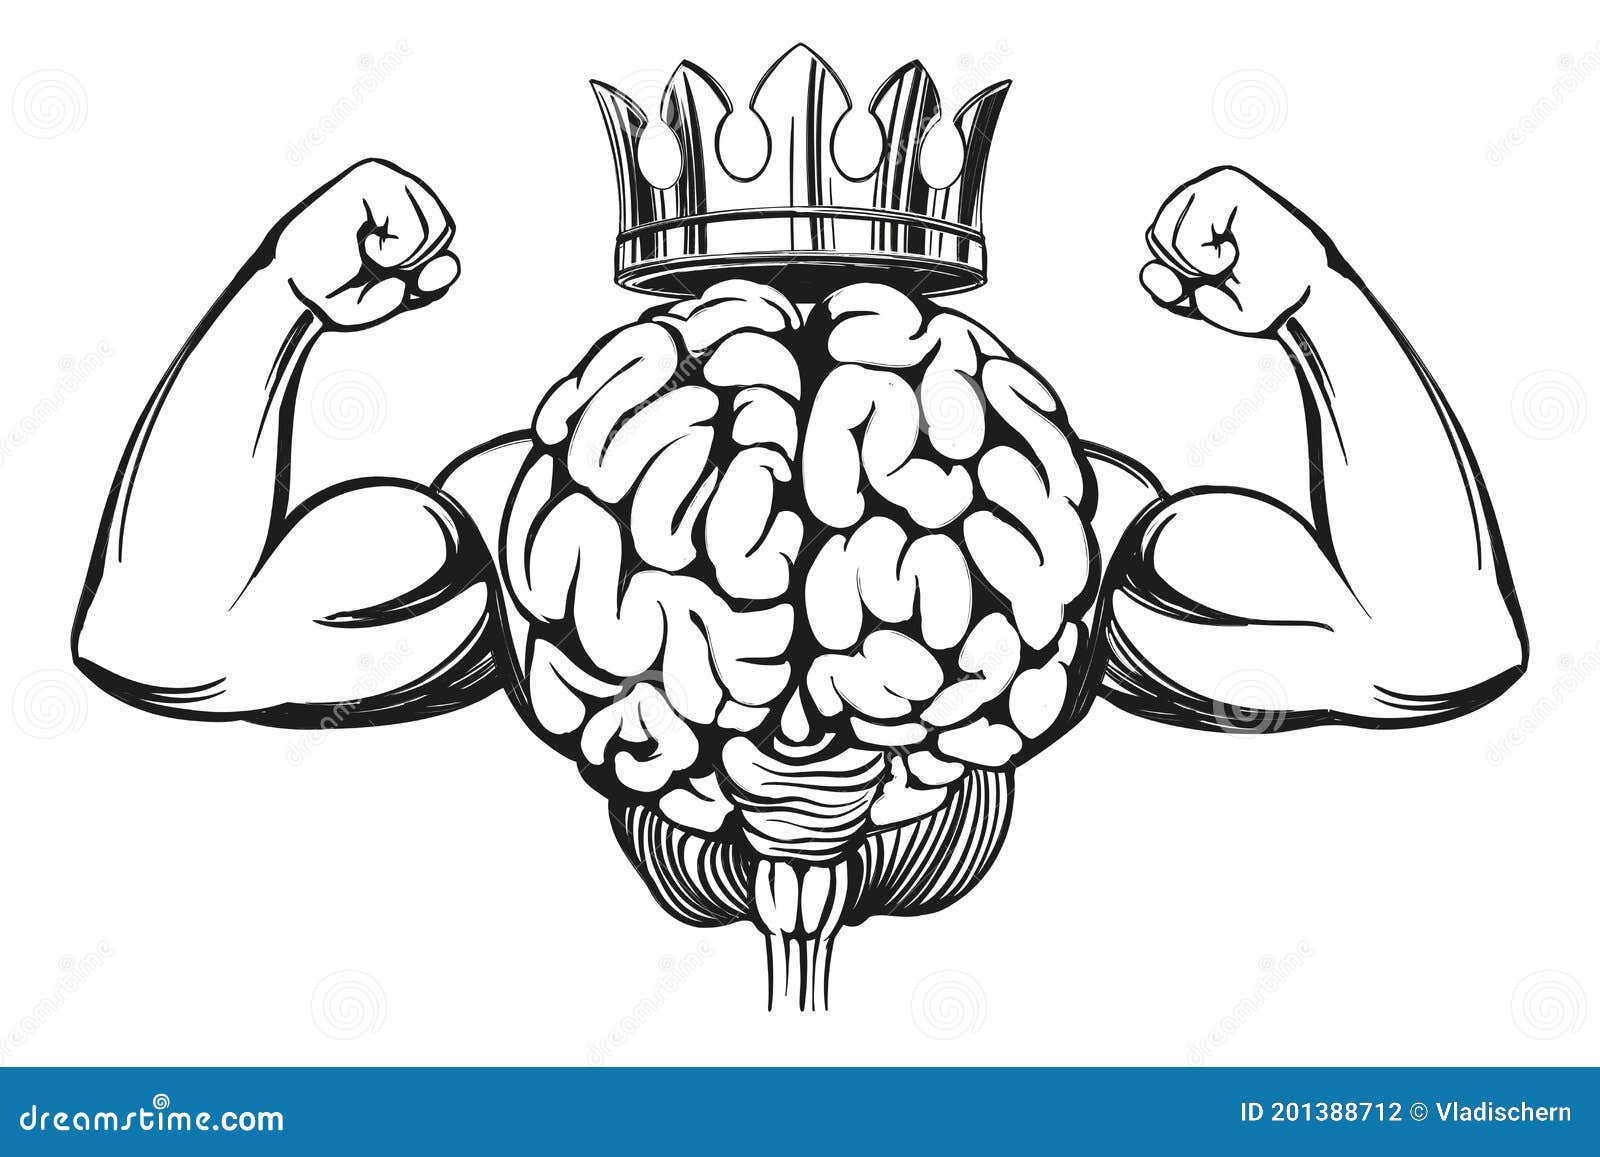 Brain with Strong Hands, Brain Training, Icon Cartoon Hand Drawn Vector  Illustration Sketch Stock Vector - Illustration of graphic, human: 201388712